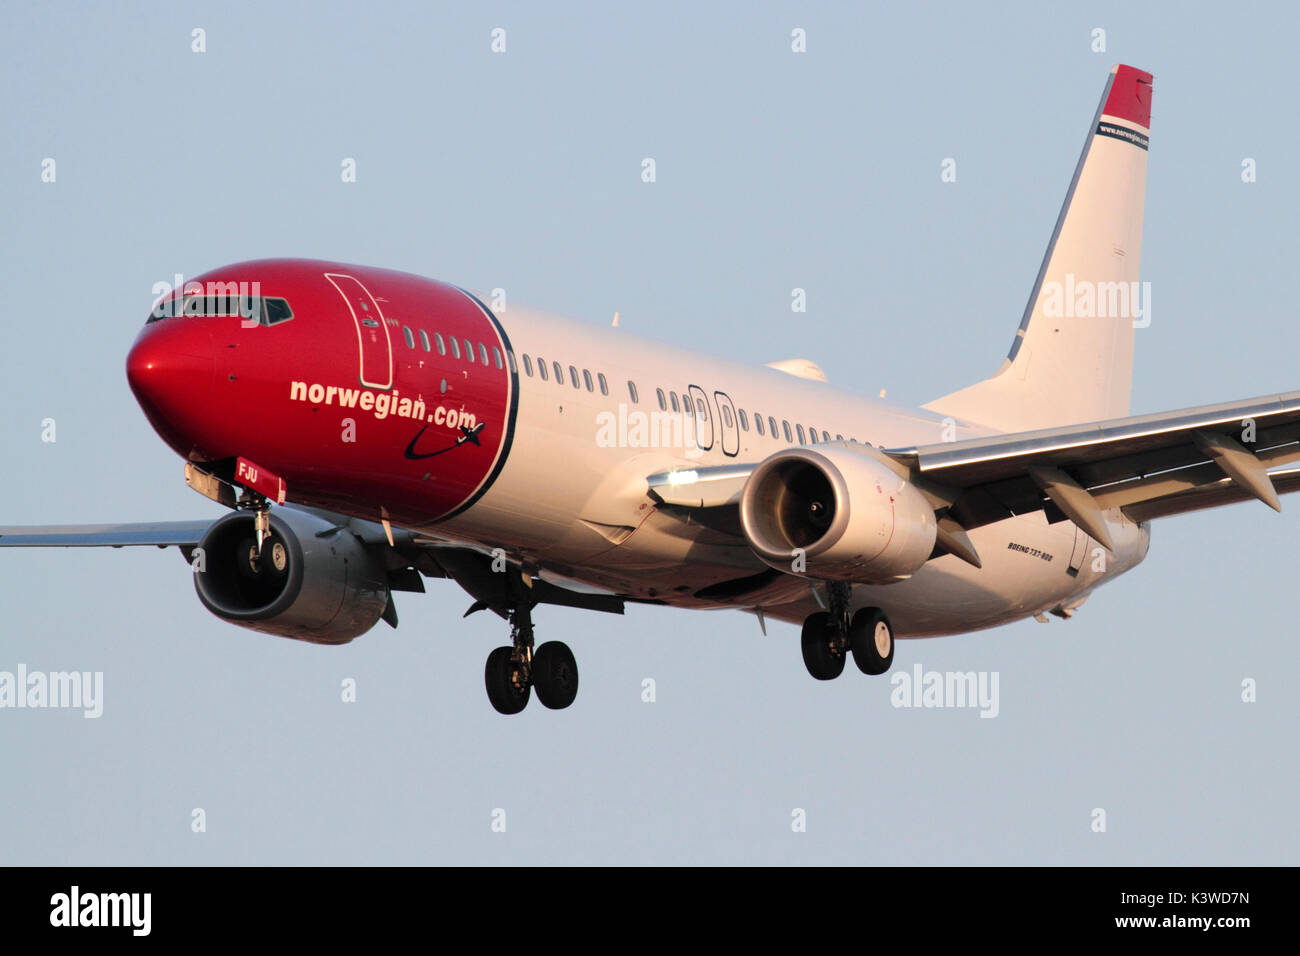 Norwegian Airlines Boeing 737-800 (737 NG or Next Generation) airliner on approach at sunset Stock Photo